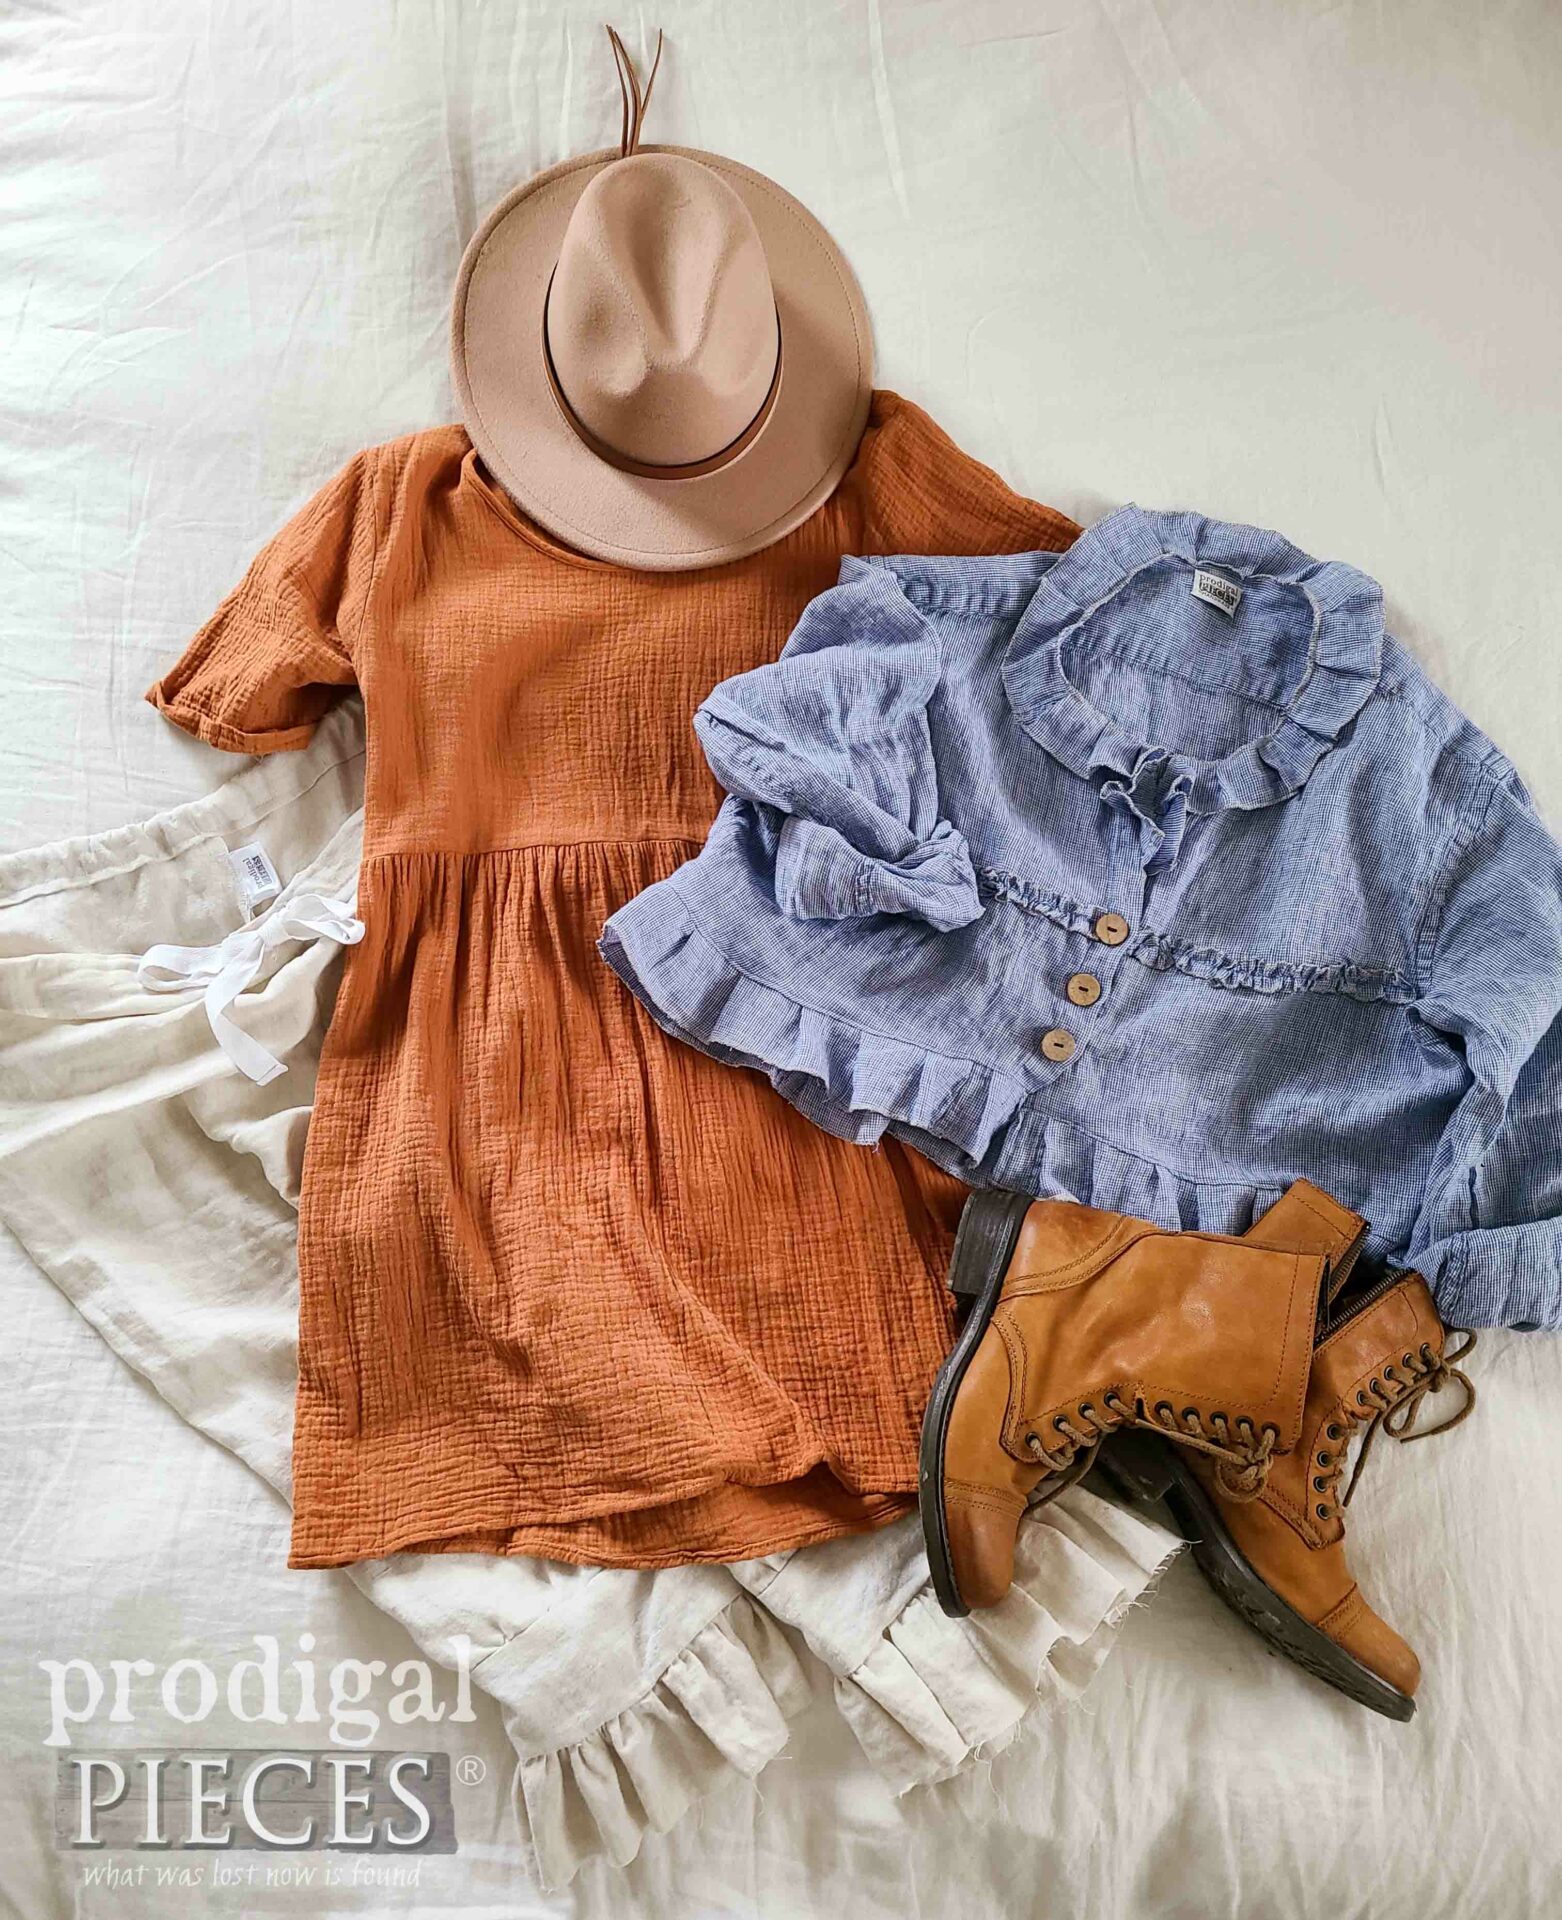 Linen Boho Style Outfit Refashioned by Larissa of Prodigal Pieces | prodigalpieces.com #prodigalpieces #style #fashionn